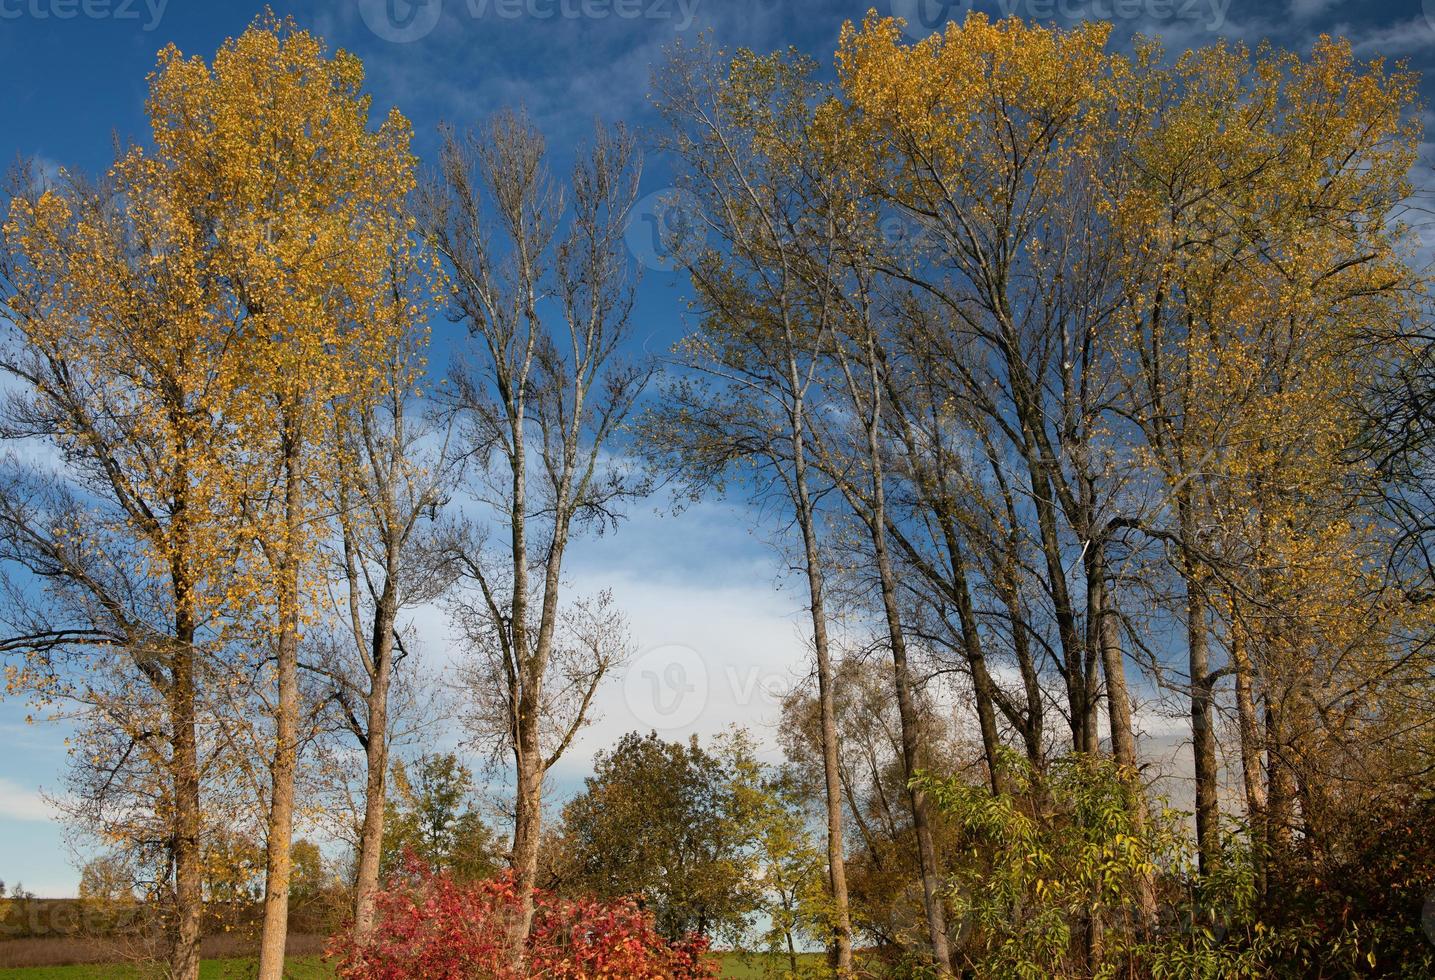 Autumn shot of birch trees whose leaves have turned yellow. In the background the blue sky with white clouds. Other trees are bare. The image is in landscape format. photo